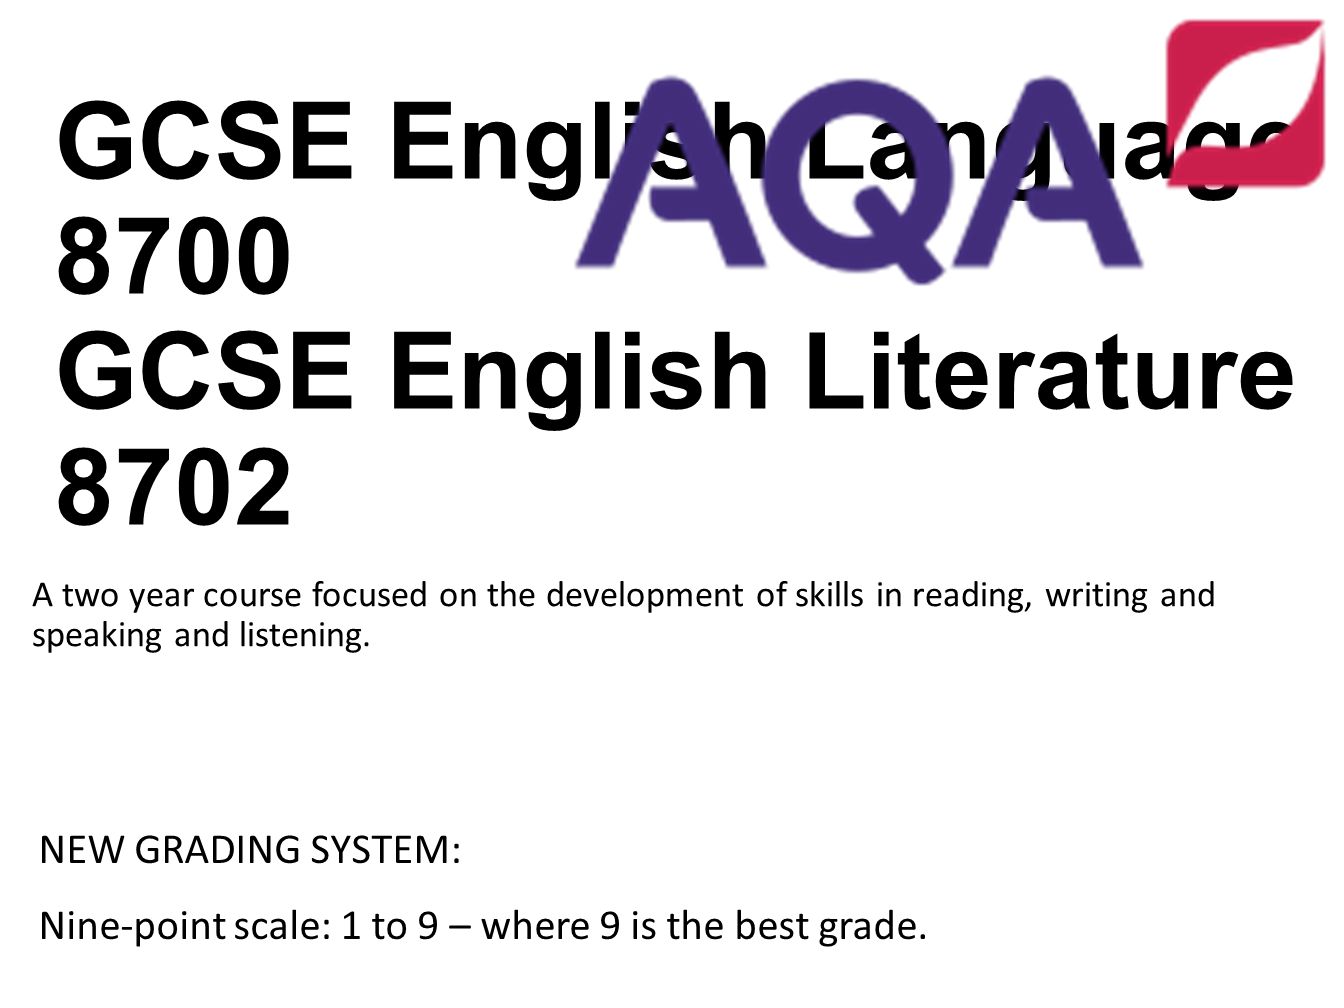 GCSE English Language 8700 GCSE English Literature 8702 A two year course focused on the development of skills in reading, writing and speaking and listening.